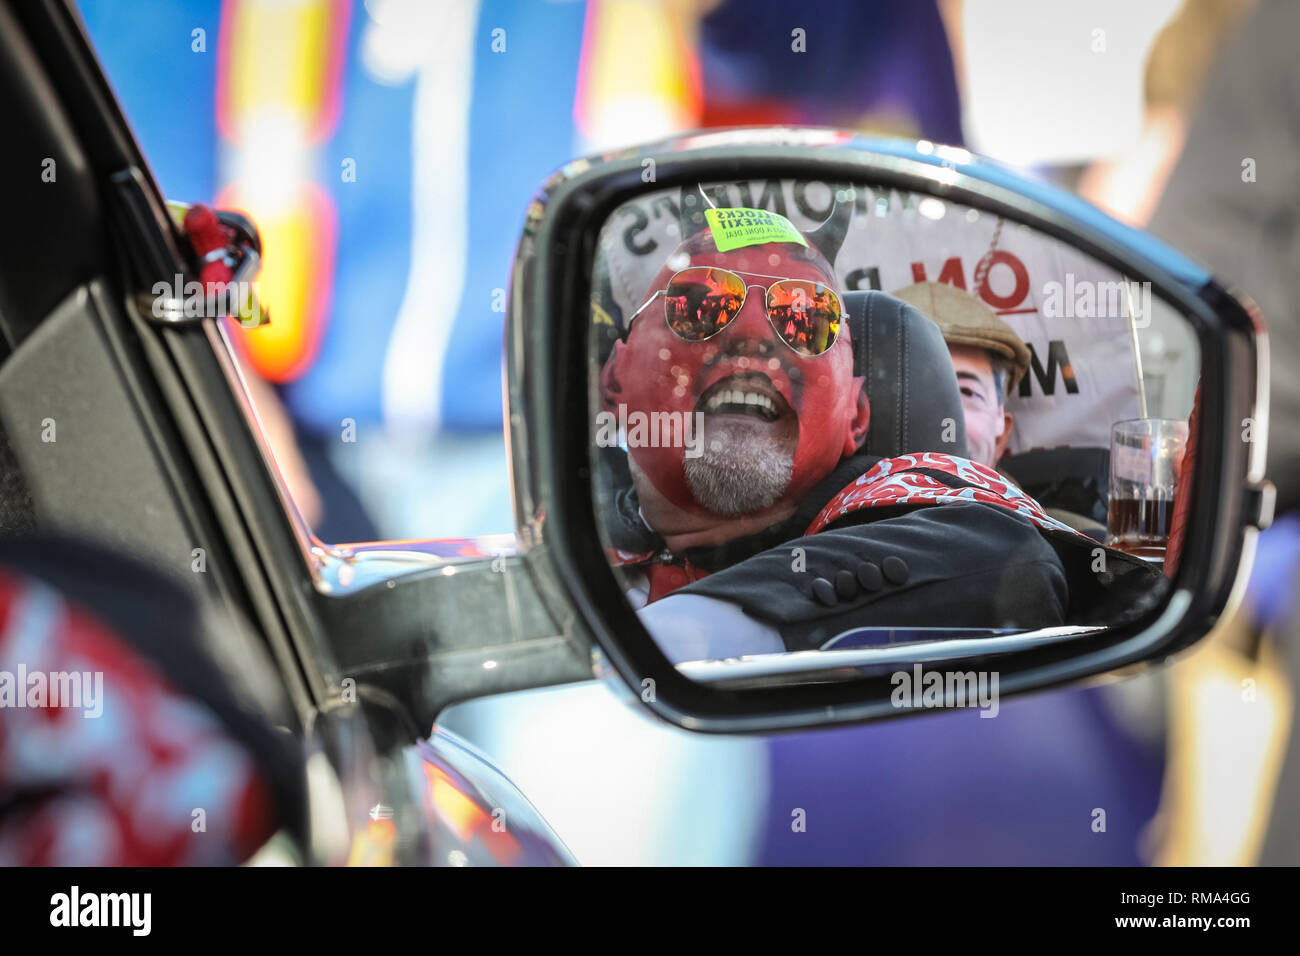 Westminster, London, UK. 14th Feb, 2019. The Devil is reflected in a car mirror. Remainers have organised a 'Fake Politicians' car, including Faux Bojo, Facob Rees-Mogg, a Fake Farage, a puppet of Theresa May, and a 'Devil'. Pro- and anti-Brexit protesters rally, wave flags and hold placards outside the Houses of Parliament and near the College Green media platforms in Westminster. Many have turned up in costumes and colourful outfits to get their message across. Credit: Imageplotter News and Sports/Alamy Live News Stock Photo